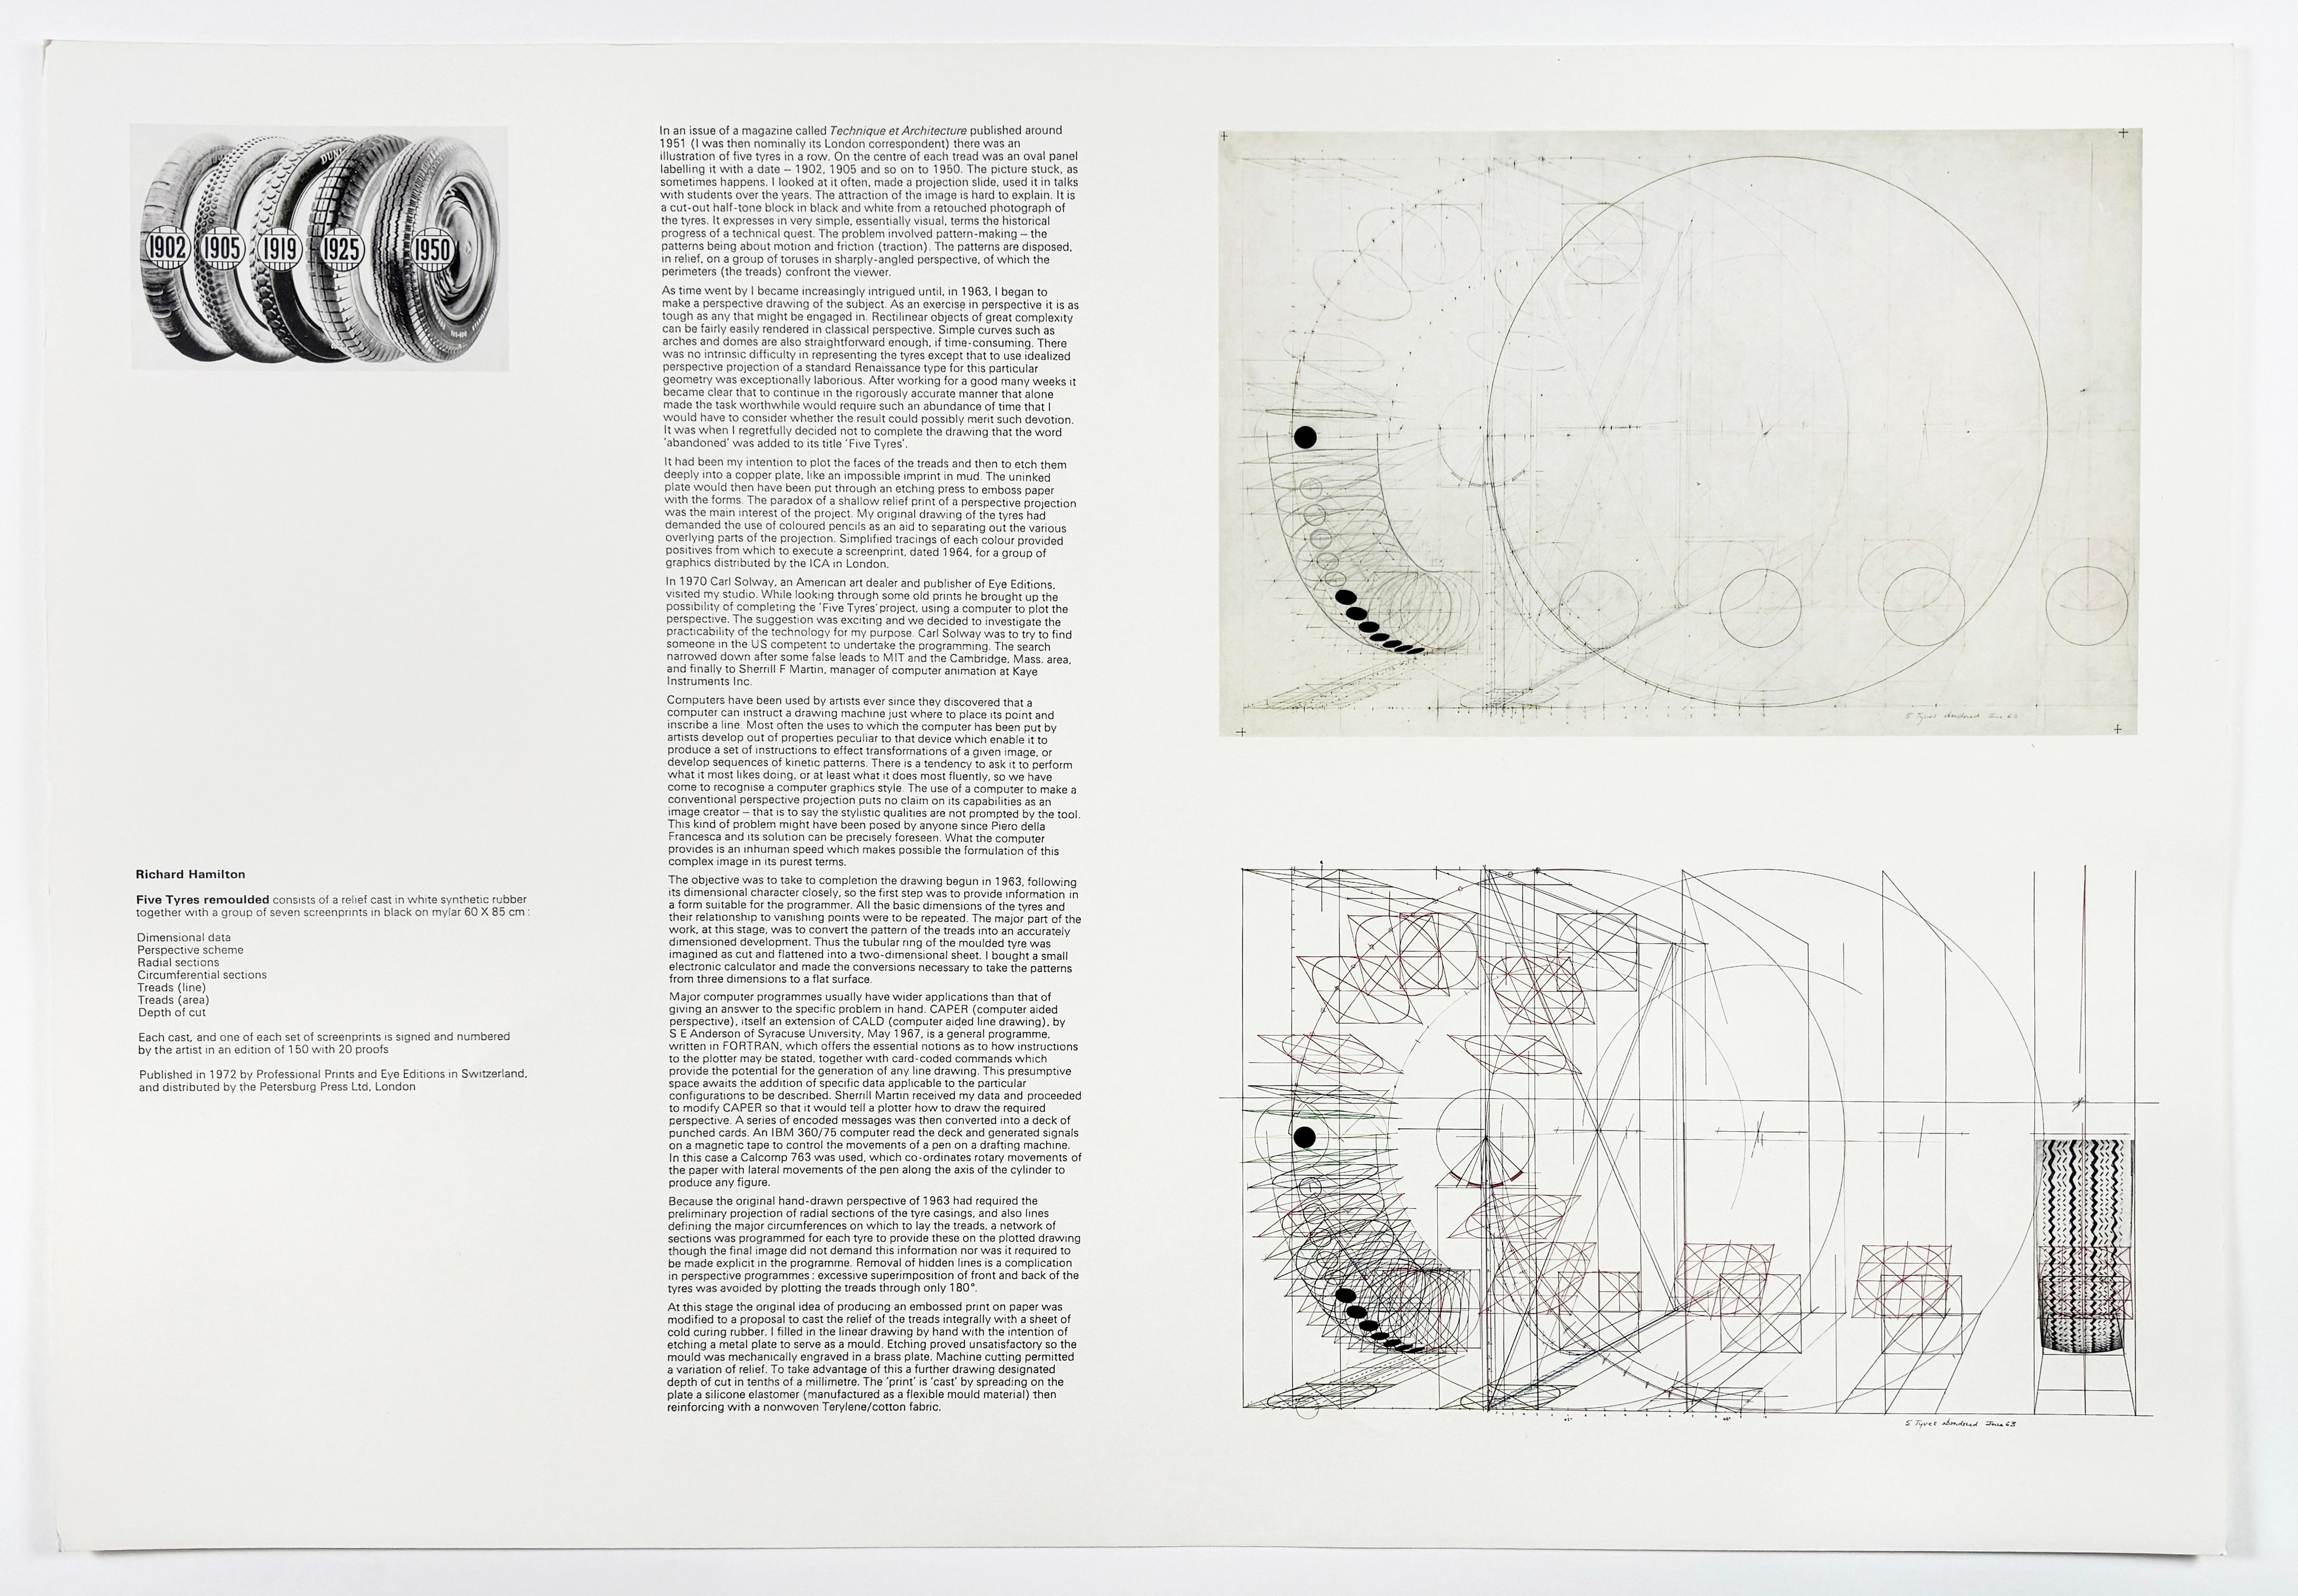 Print with schematics and text from Richard Hamilton's Five Tyres Remoulded portfolio, featuring imagery from the portfolio.

5 color collotype sheet printed on card from Five Tyres Remoulded 1971 portfolio
Sheet 23.64 x 33.46 in. 

